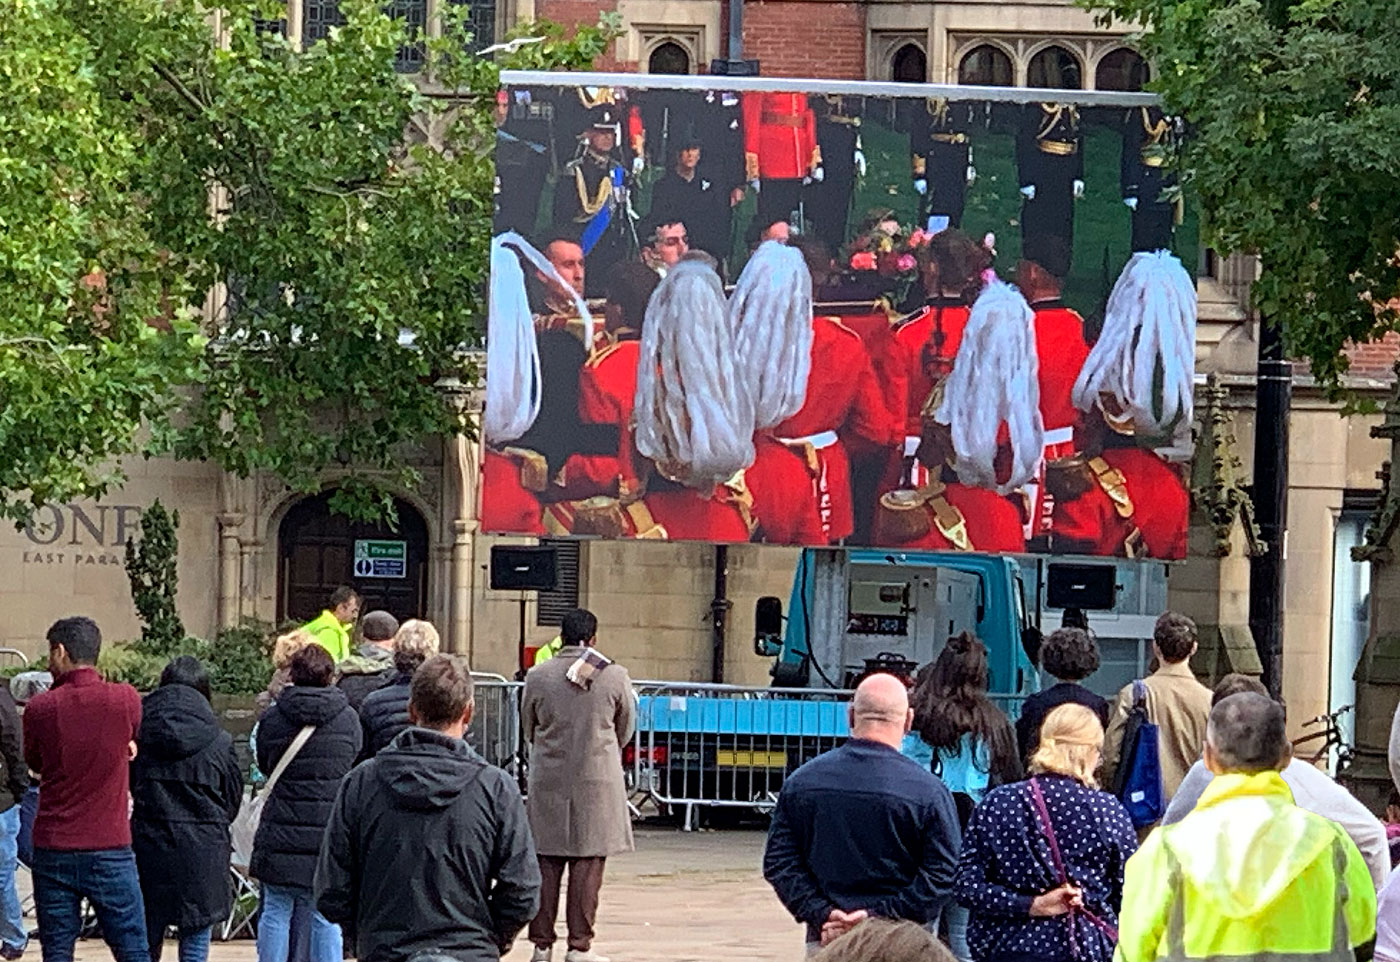 Her Majesty Queen Elizabeth II's funeral coverage and memorial service, Sheffield Cathedral 2022